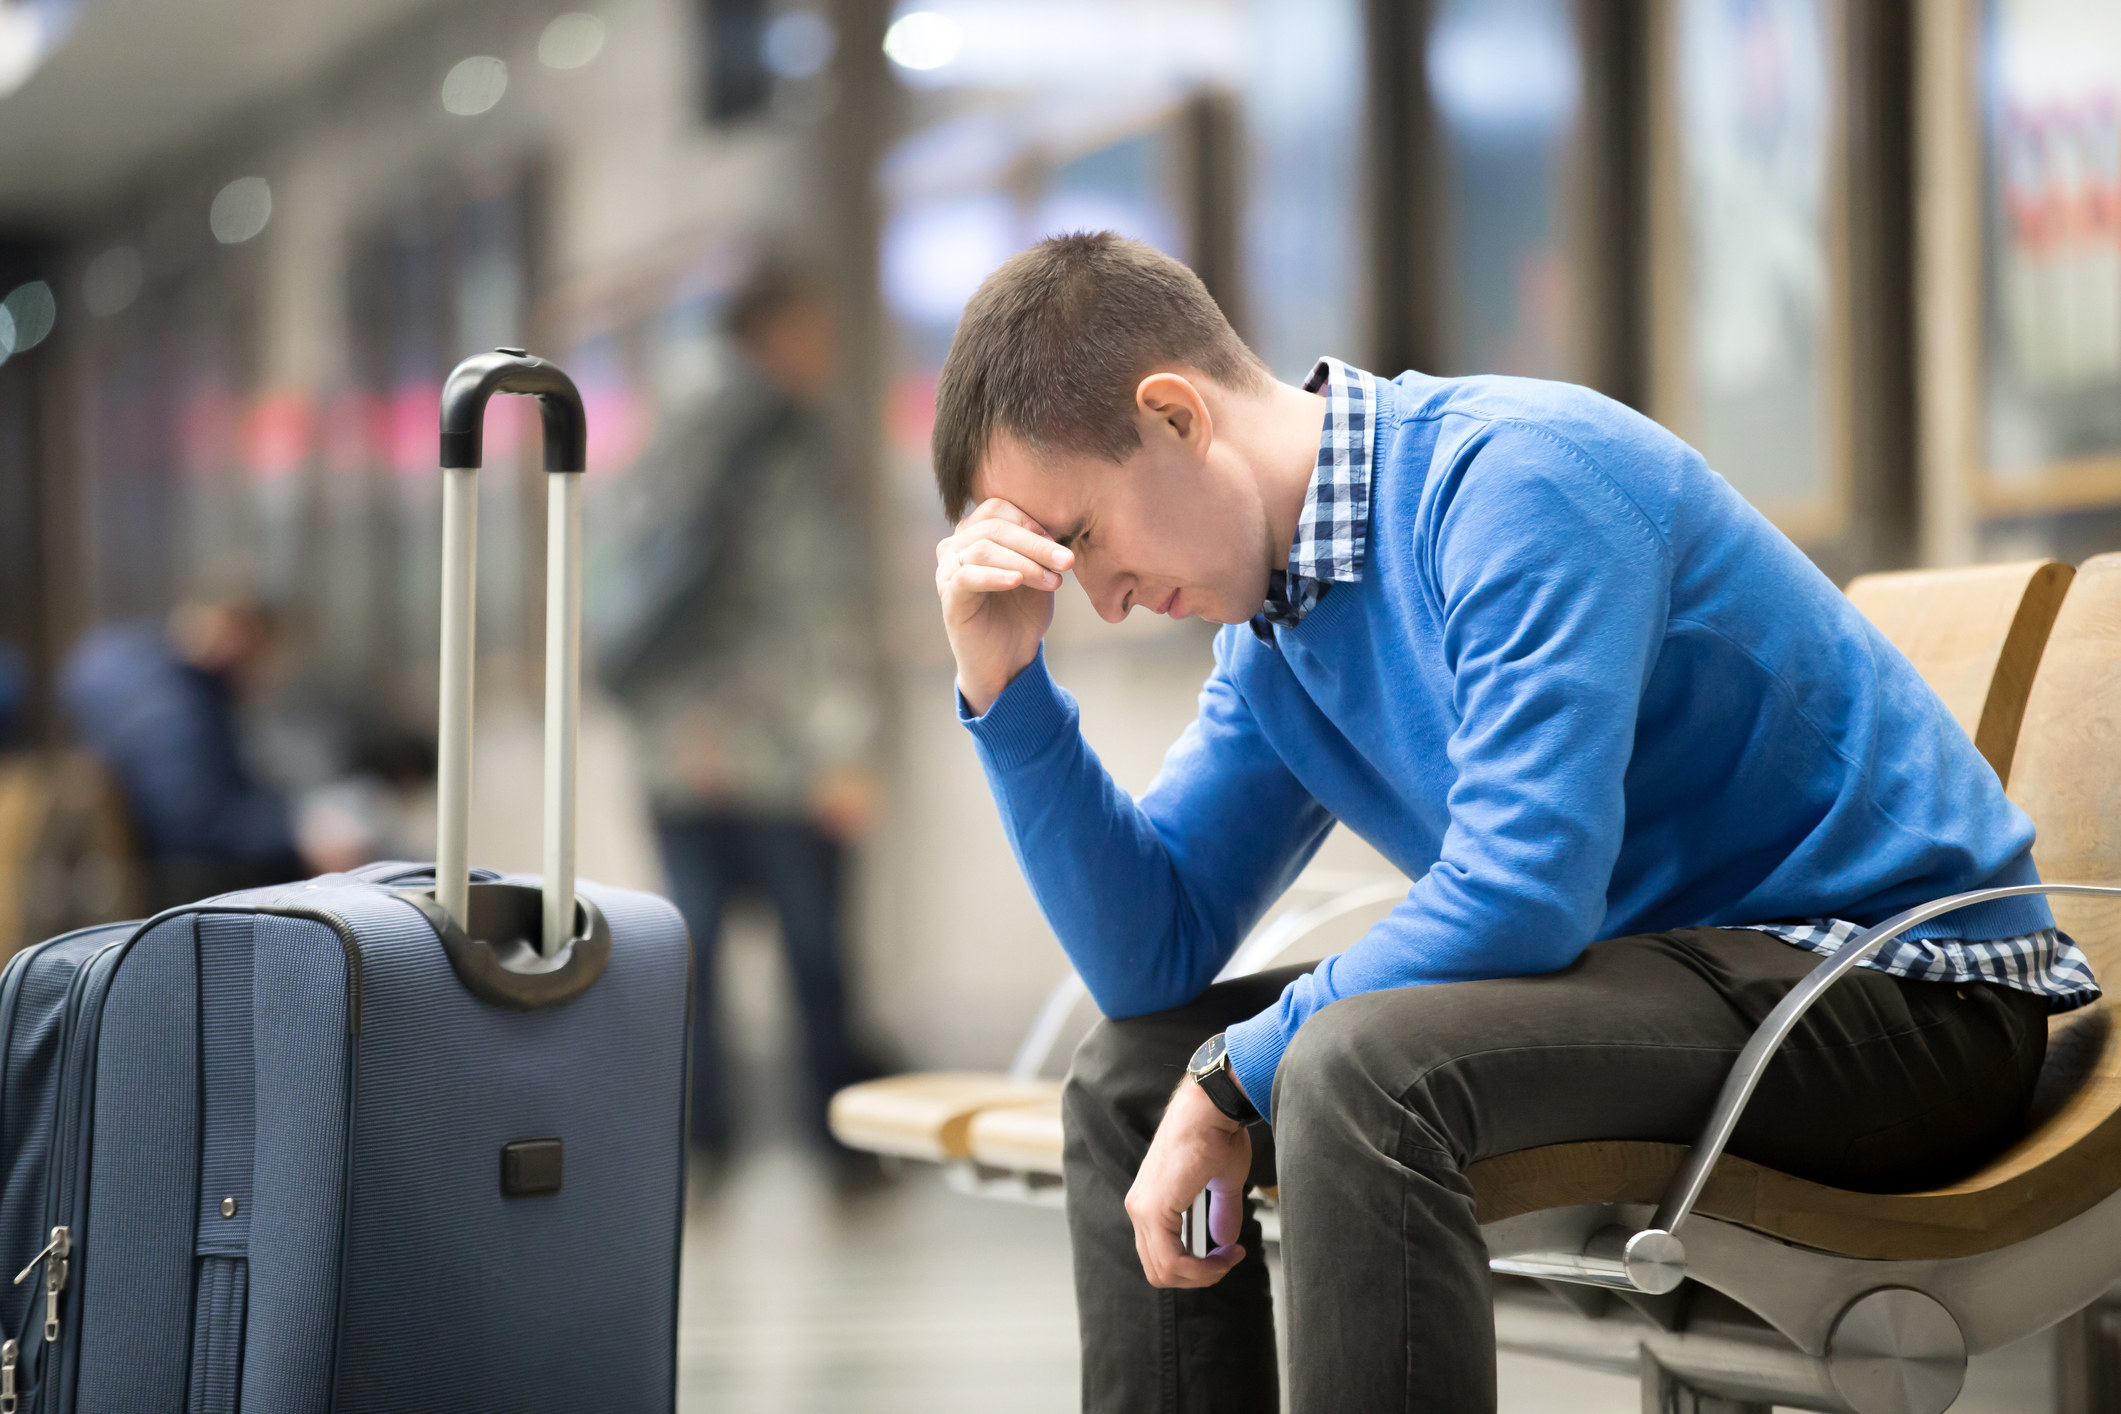 A man looking stressed in an airport